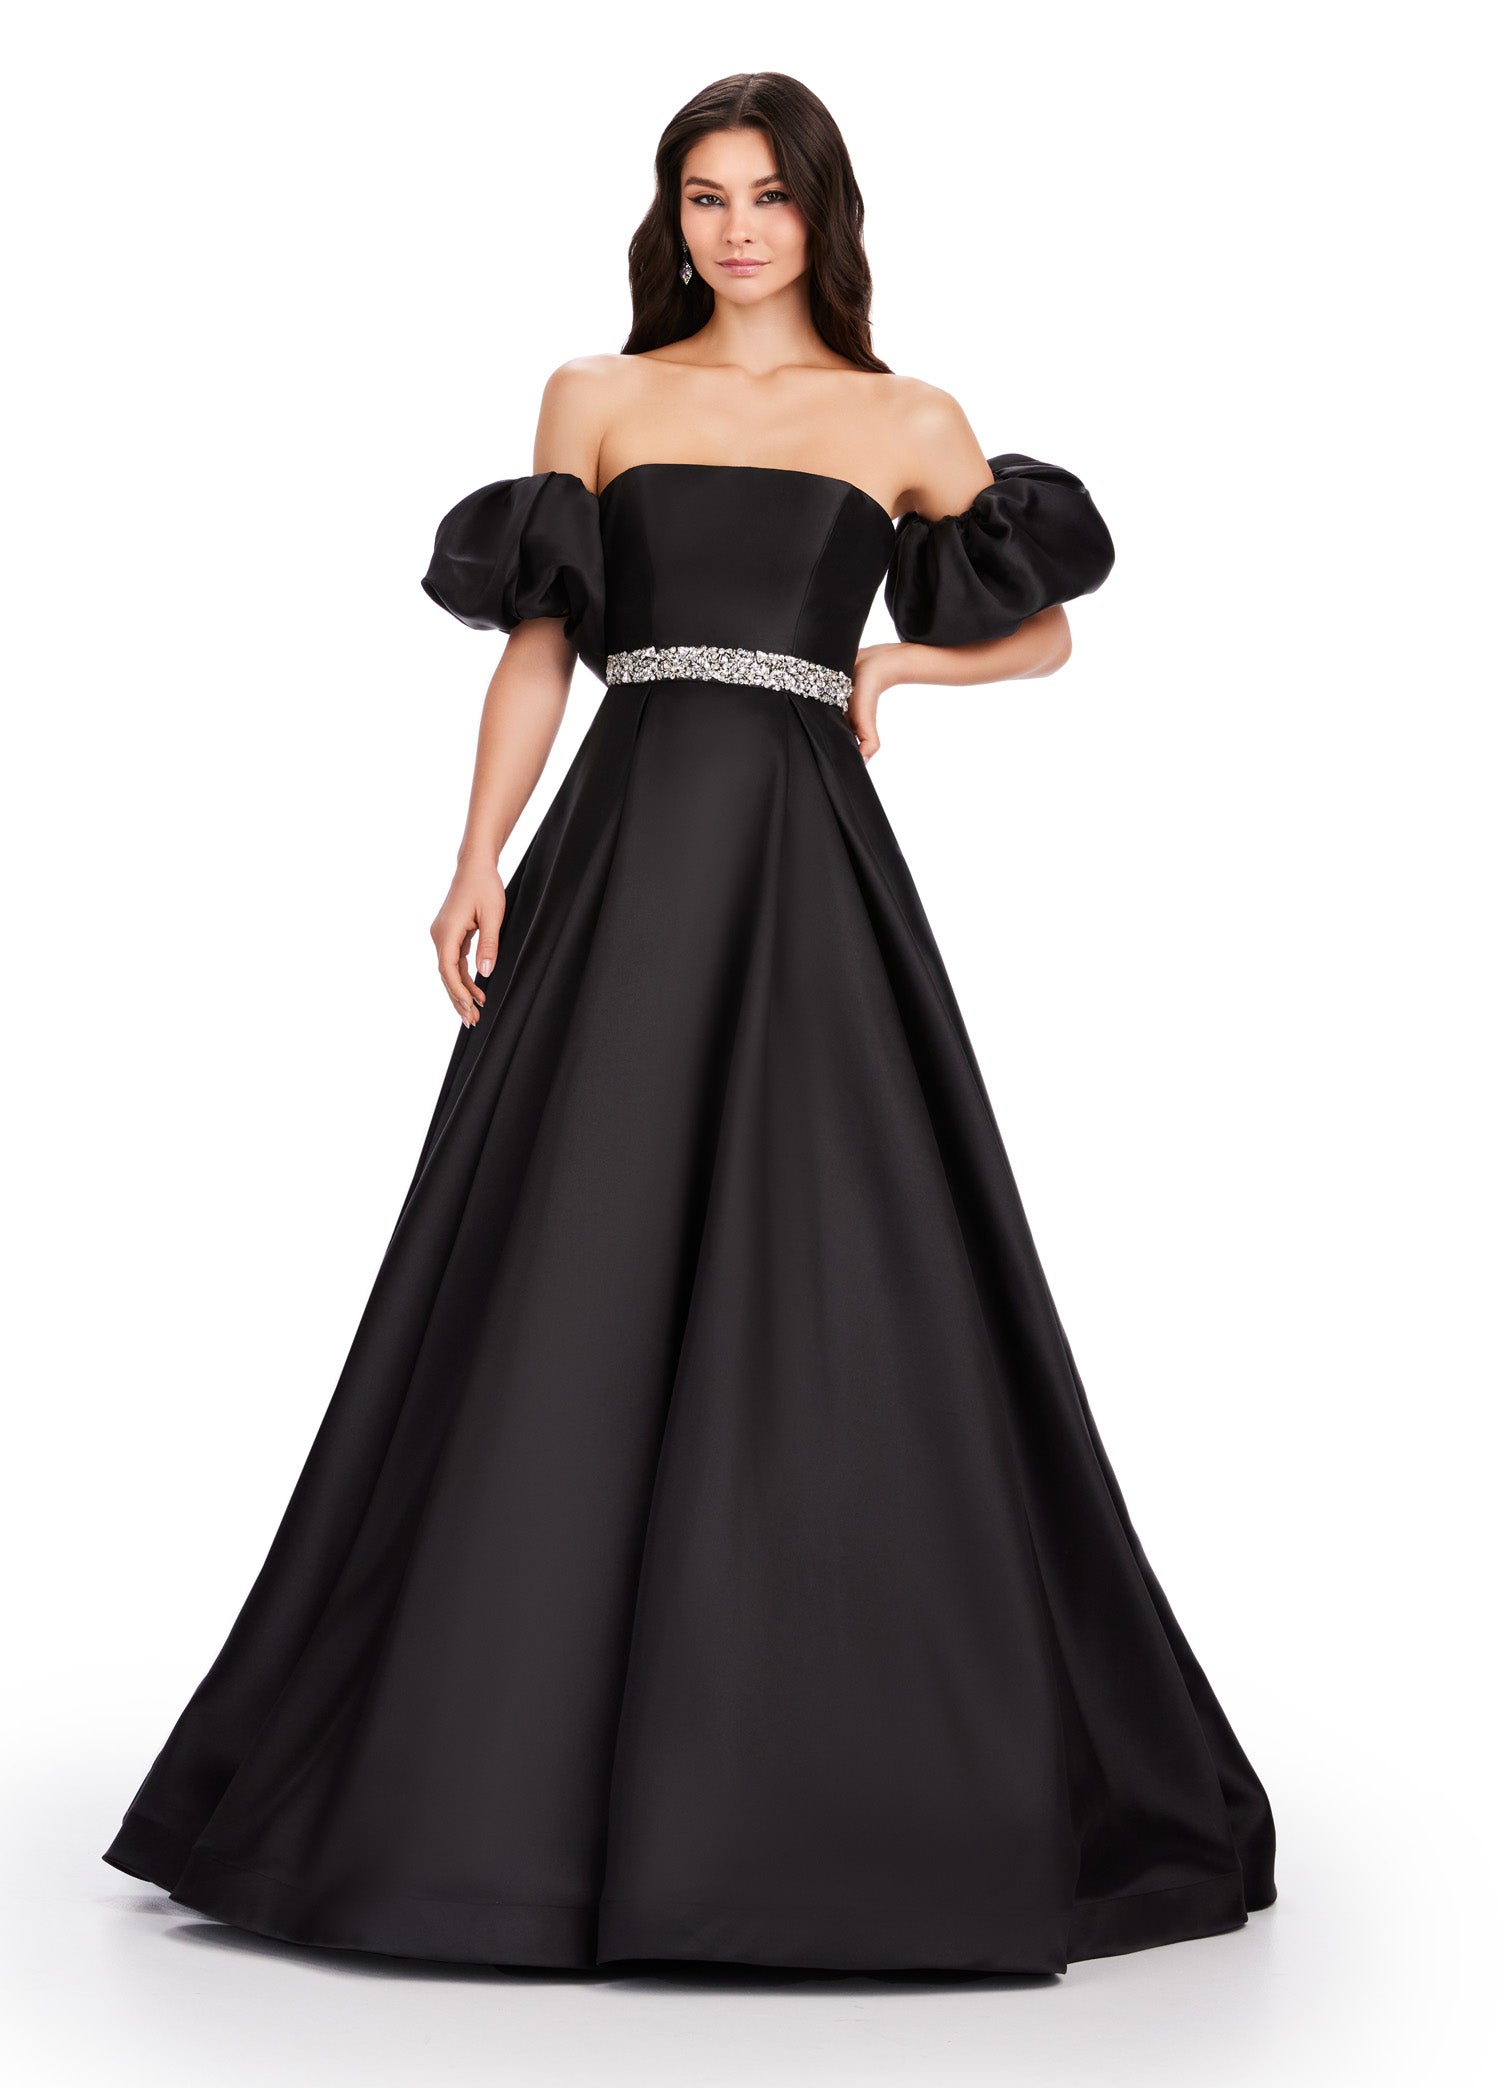 Elevate your formal look with the Ashley Lauren 11543 Long Prom Dress. The off-shoulder, puff sleeve design exudes elegance while the Mikado ball gown silhouette adds drama. Perfect for proms, pageants, and other formal occasions. his classic strapless Mikado ball gown features a beaded waist band. The look is complete with detachable puff sleeves.